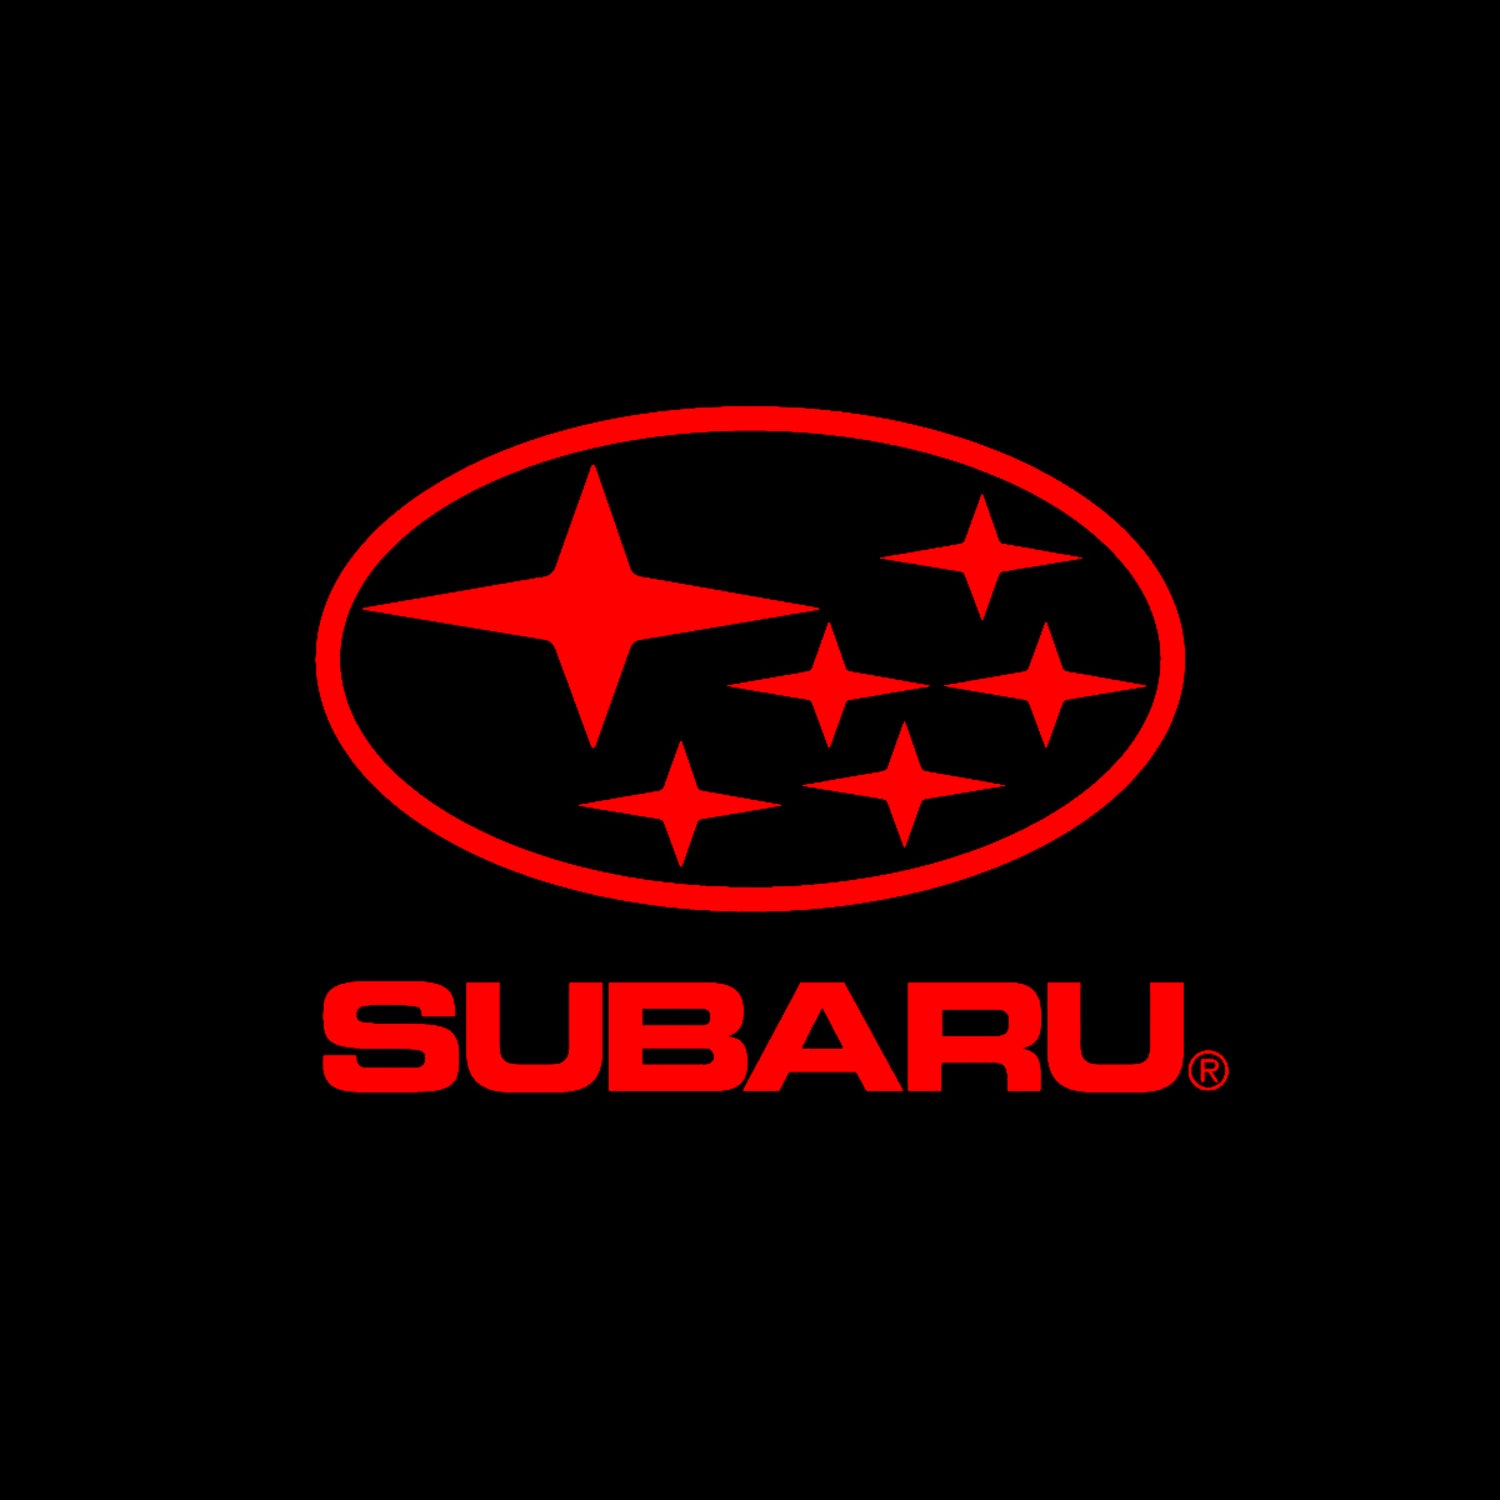 Subaru Logo in red with black background